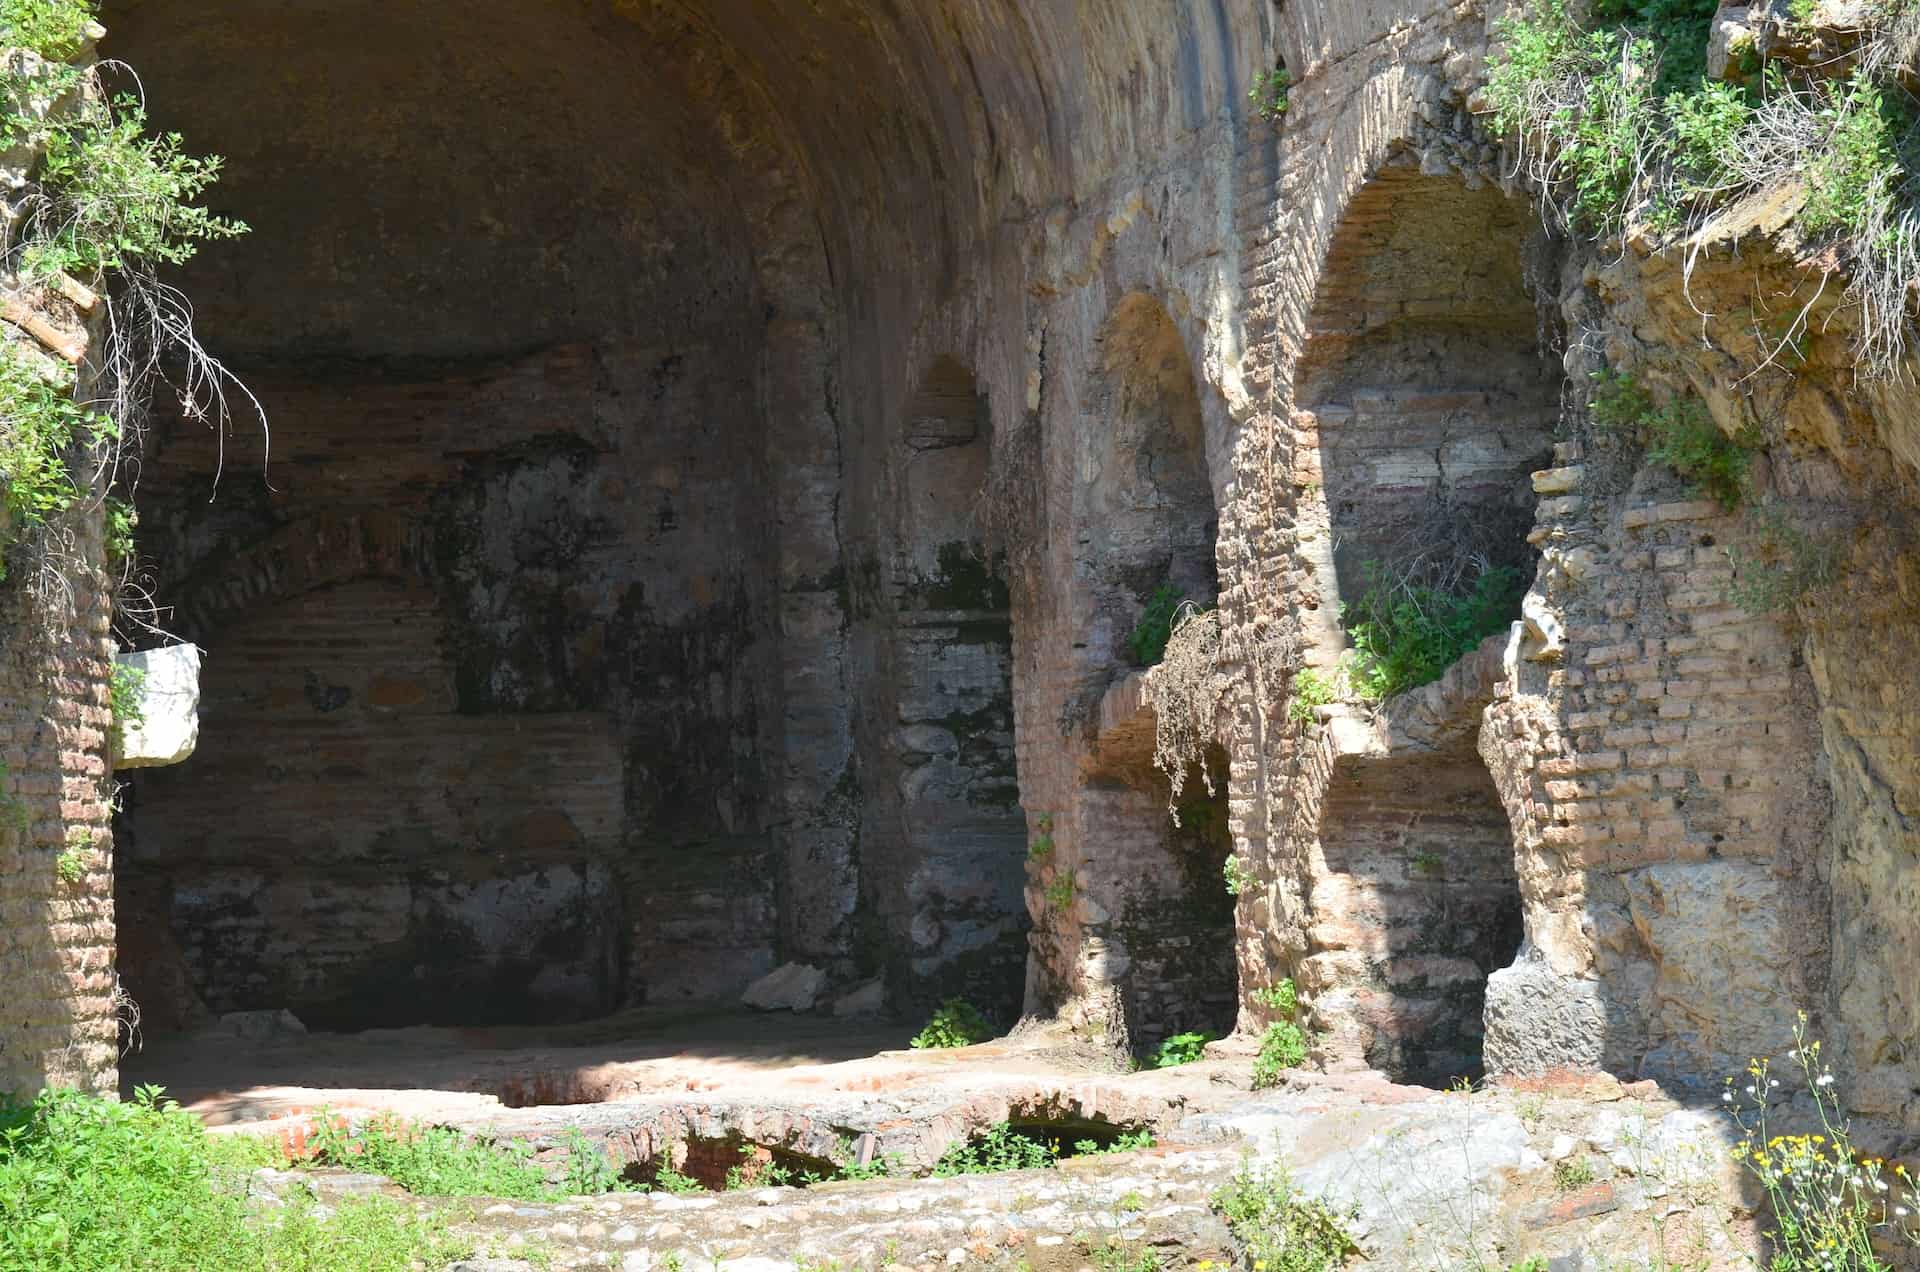 Grotto of the Seven Sleepers in Selçuk, Turkey